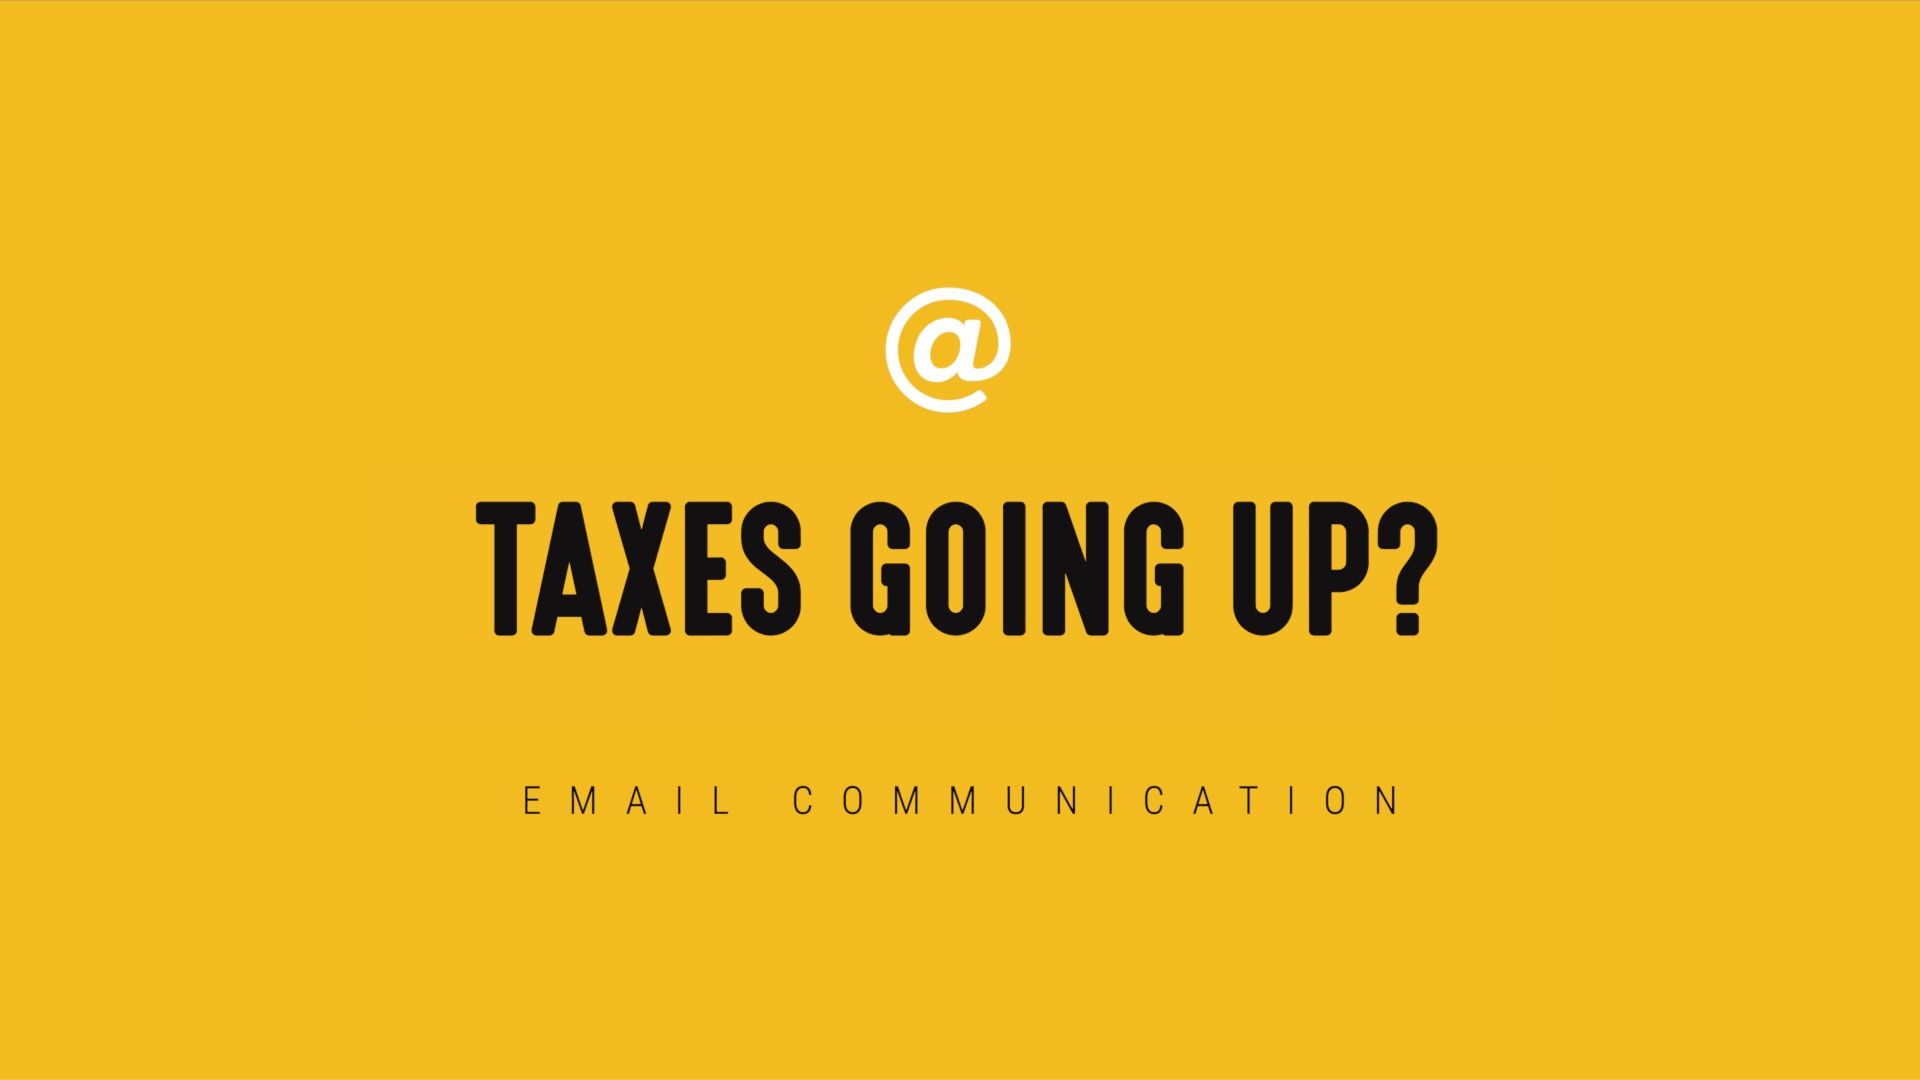 [NEW] Single-Topic Email | Taxes Going Up?